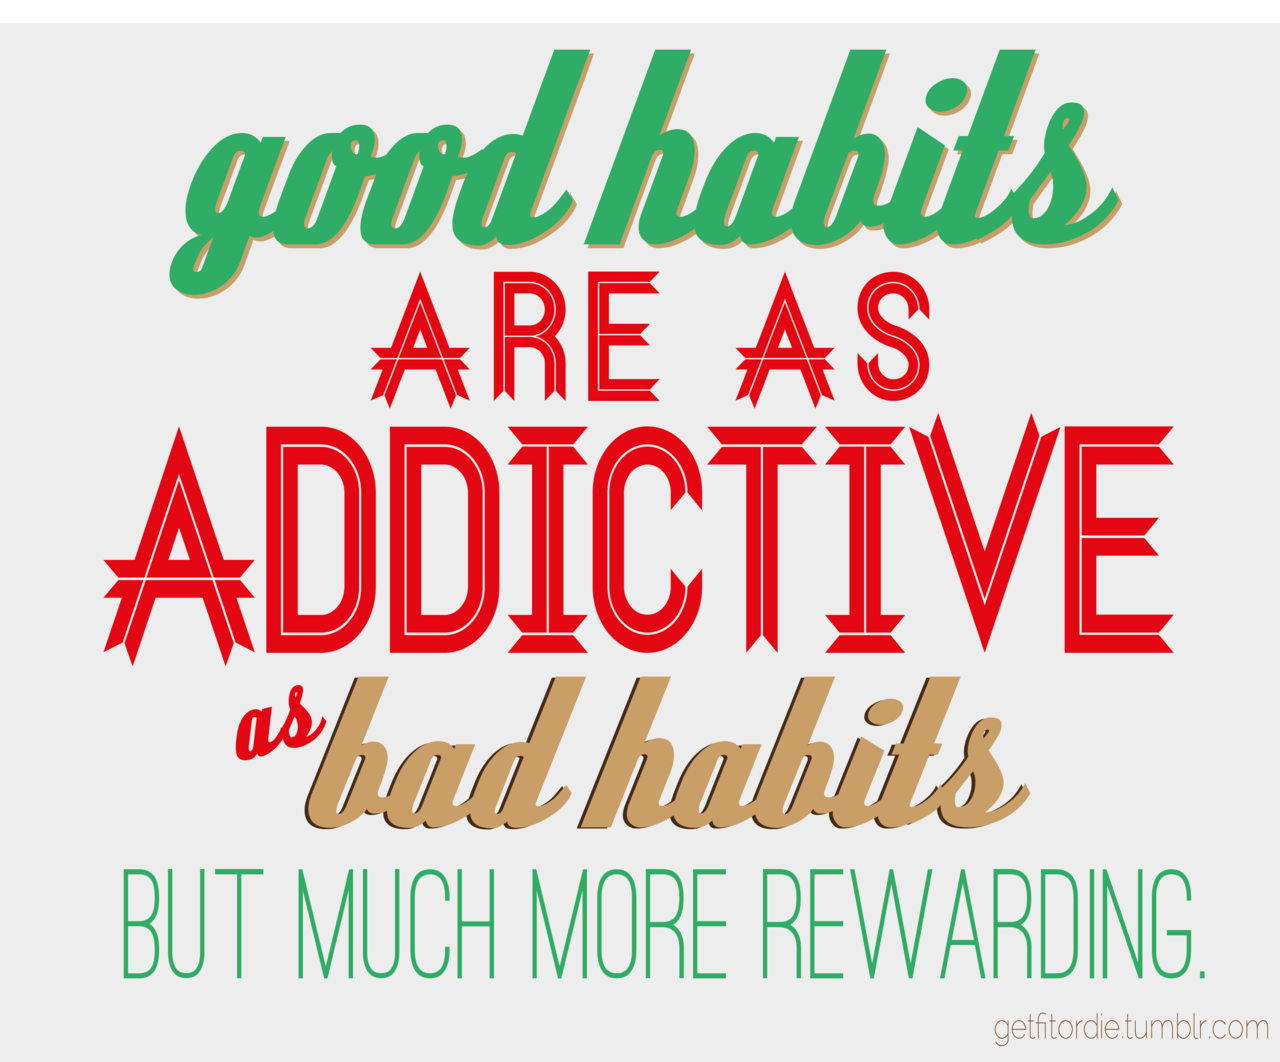 Runner Things #1590: Good habits are as addictive as bad habits but much more rewarding.